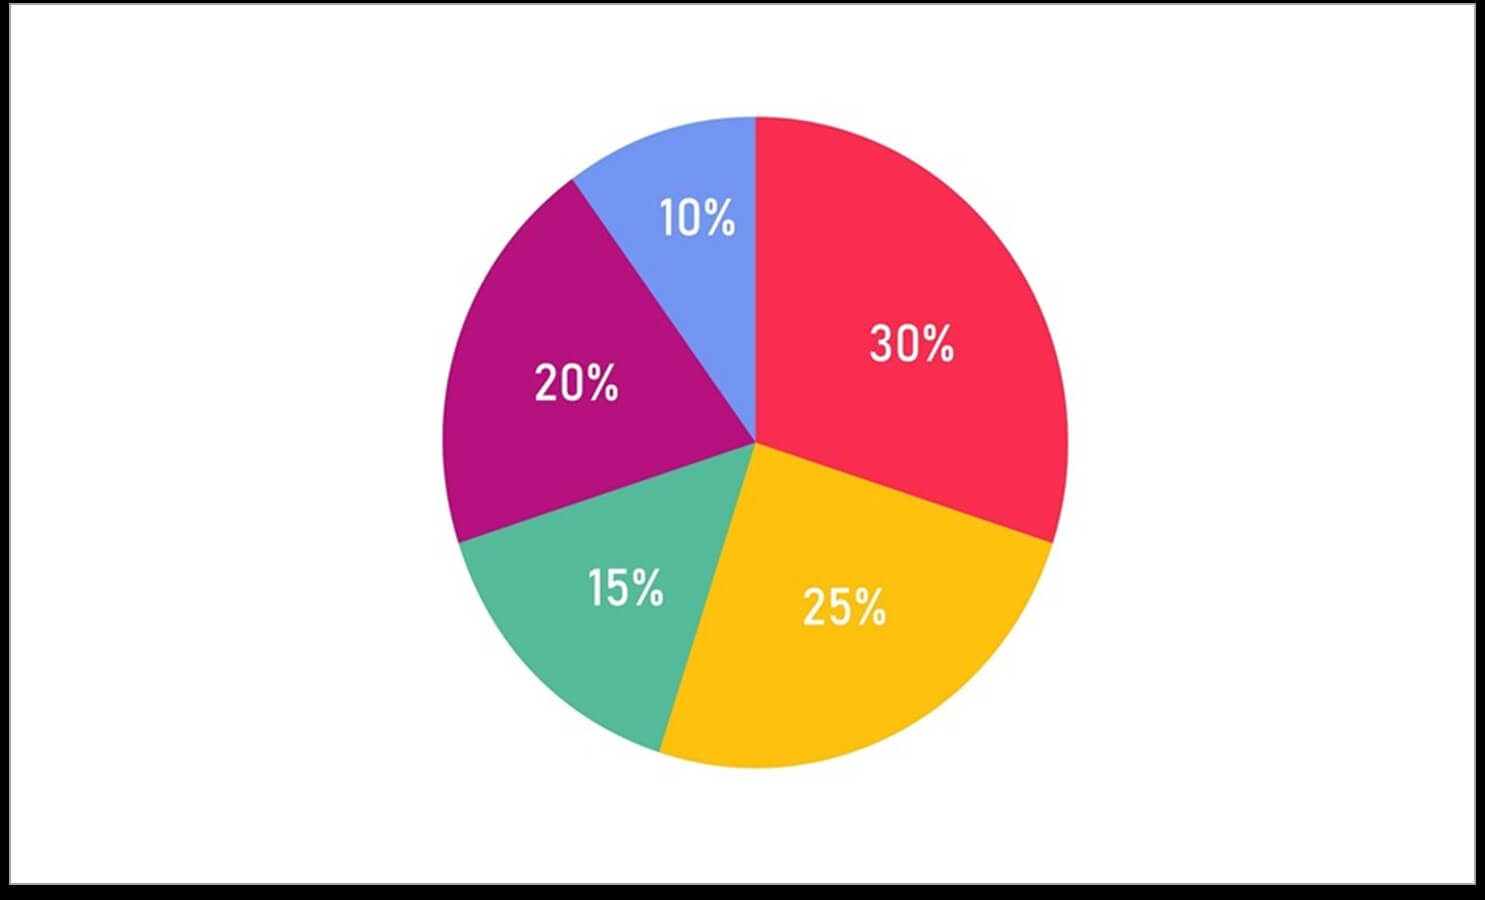 Image of a pie chart that can be used in a sales pitch deck.